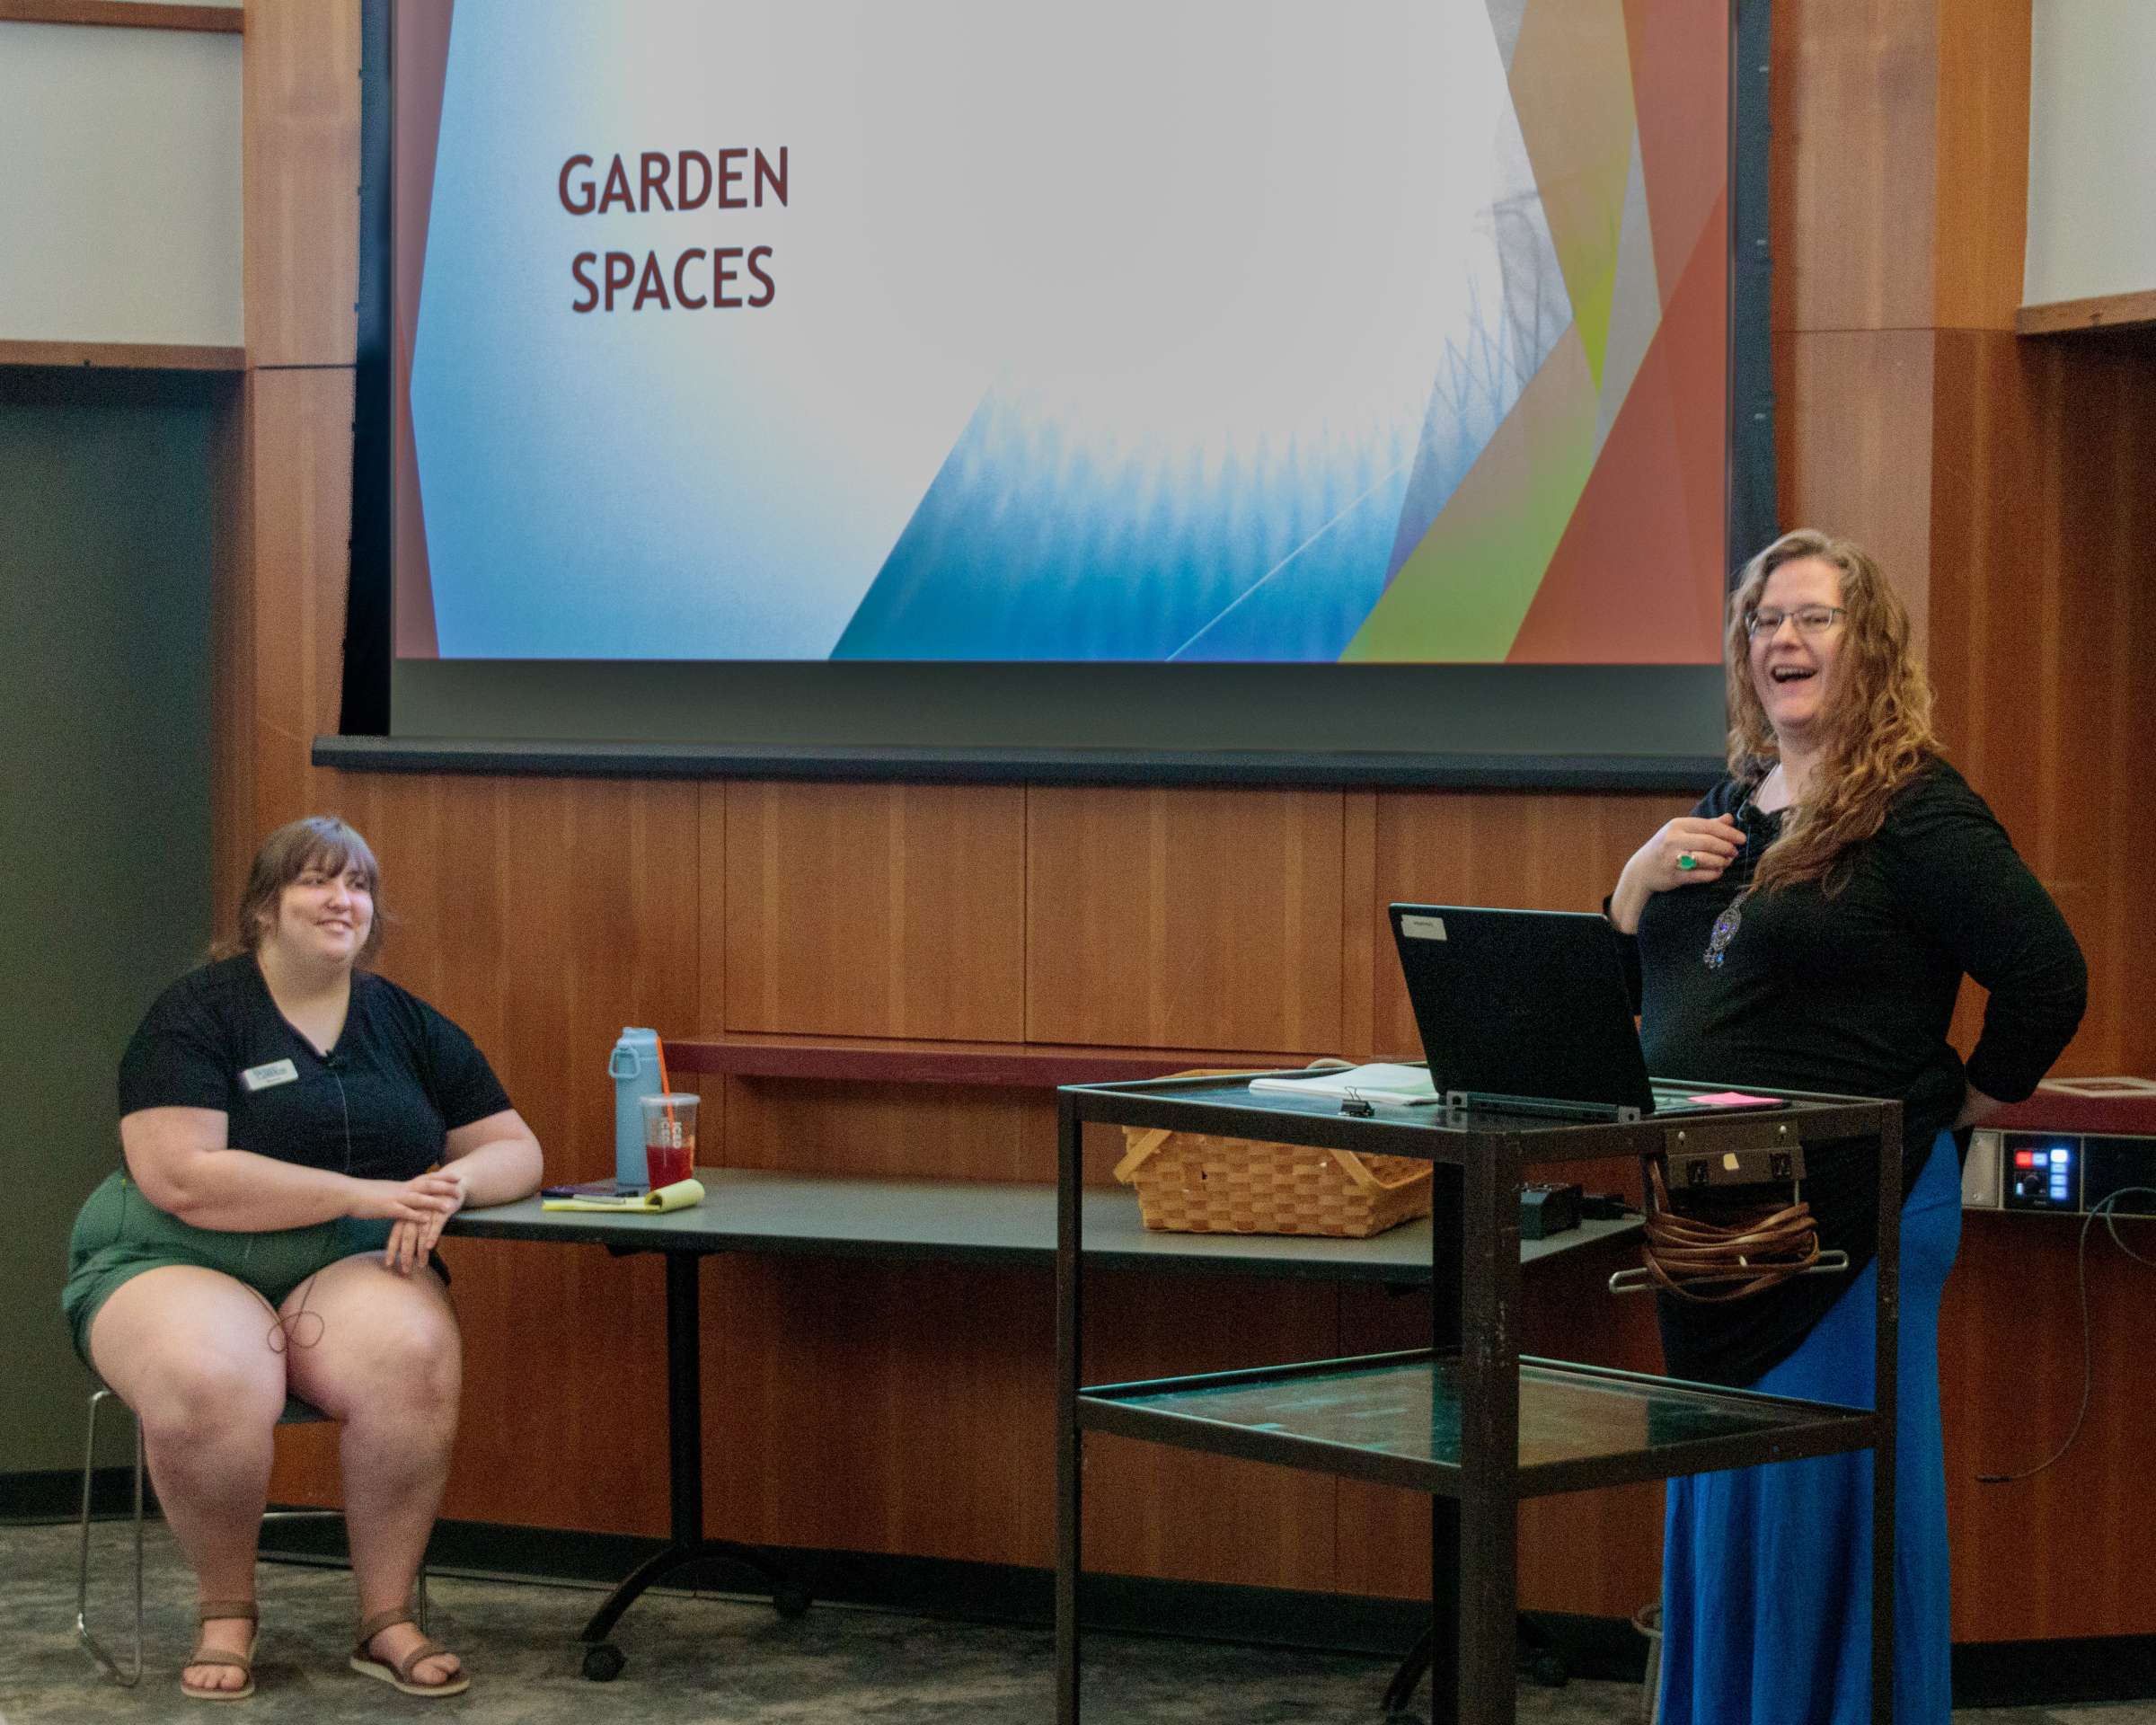 Interior of auditorium, two women stand before a screen, about to give a presentation on Garden Spaces.